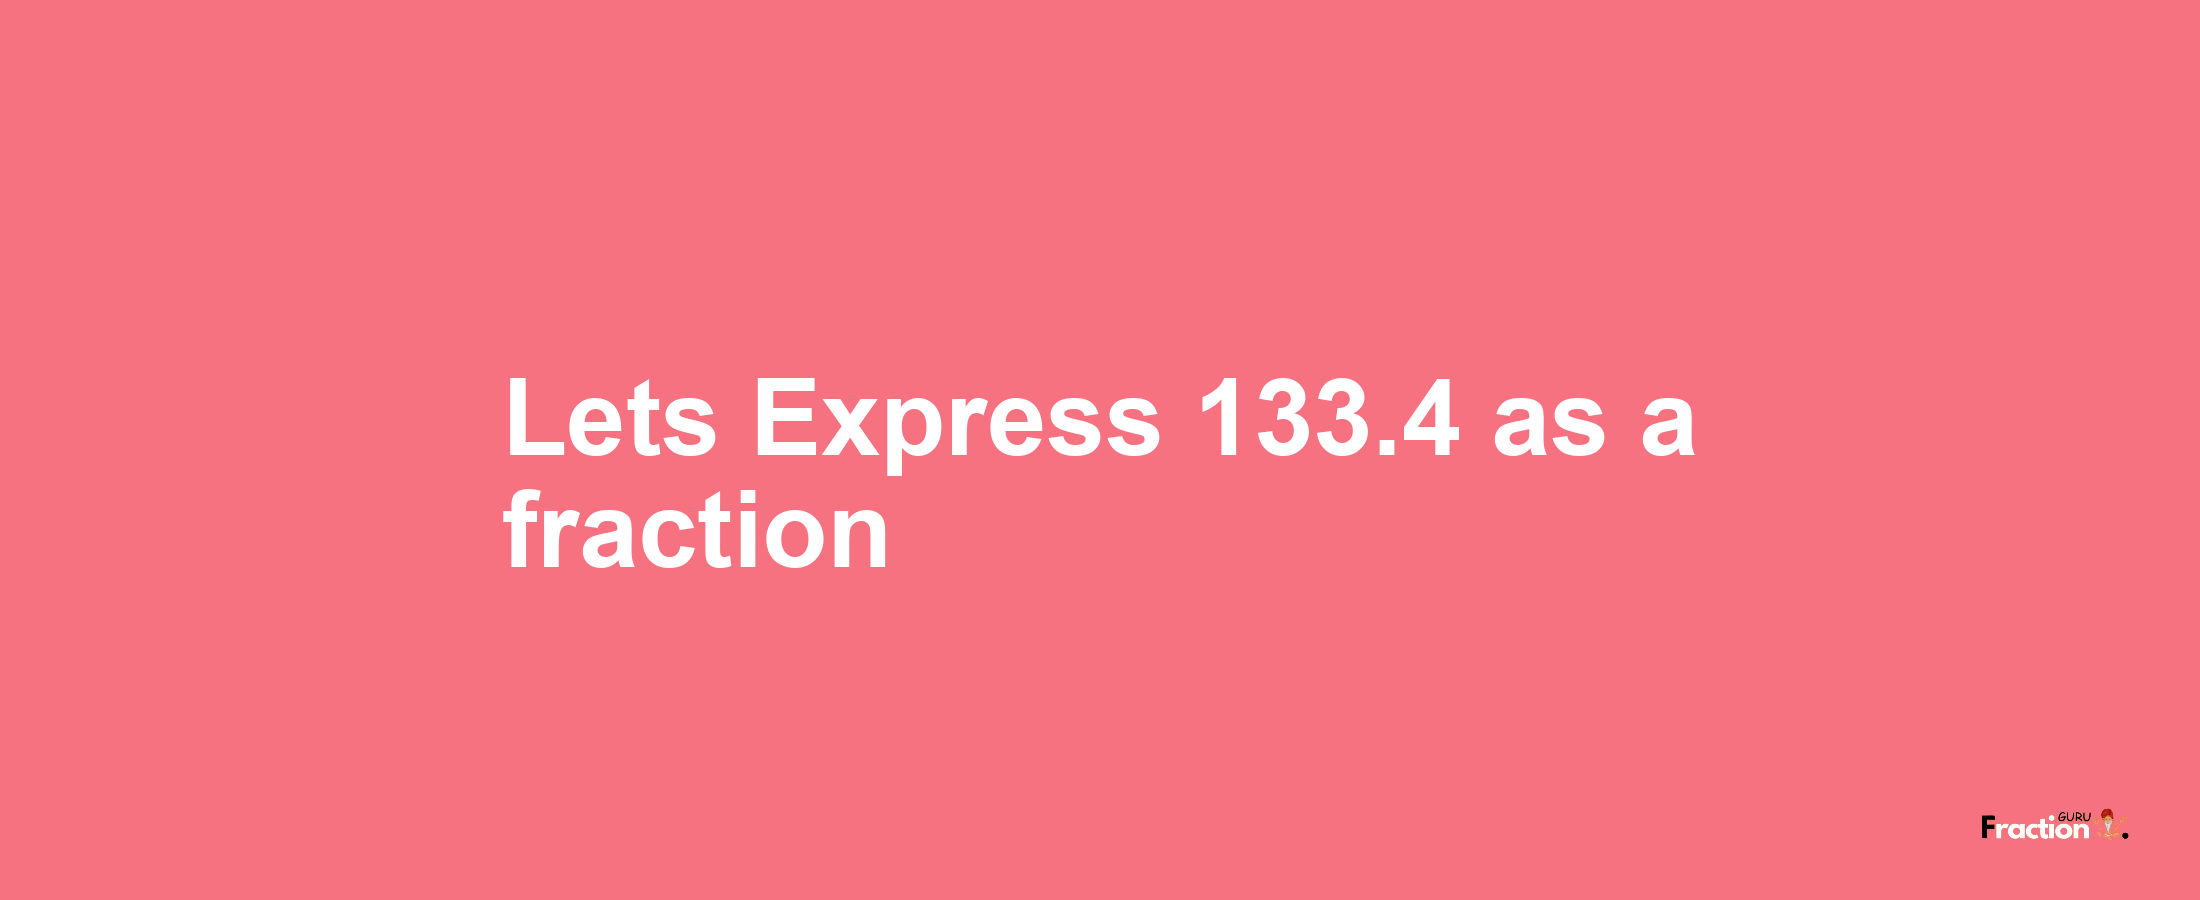 Lets Express 133.4 as afraction